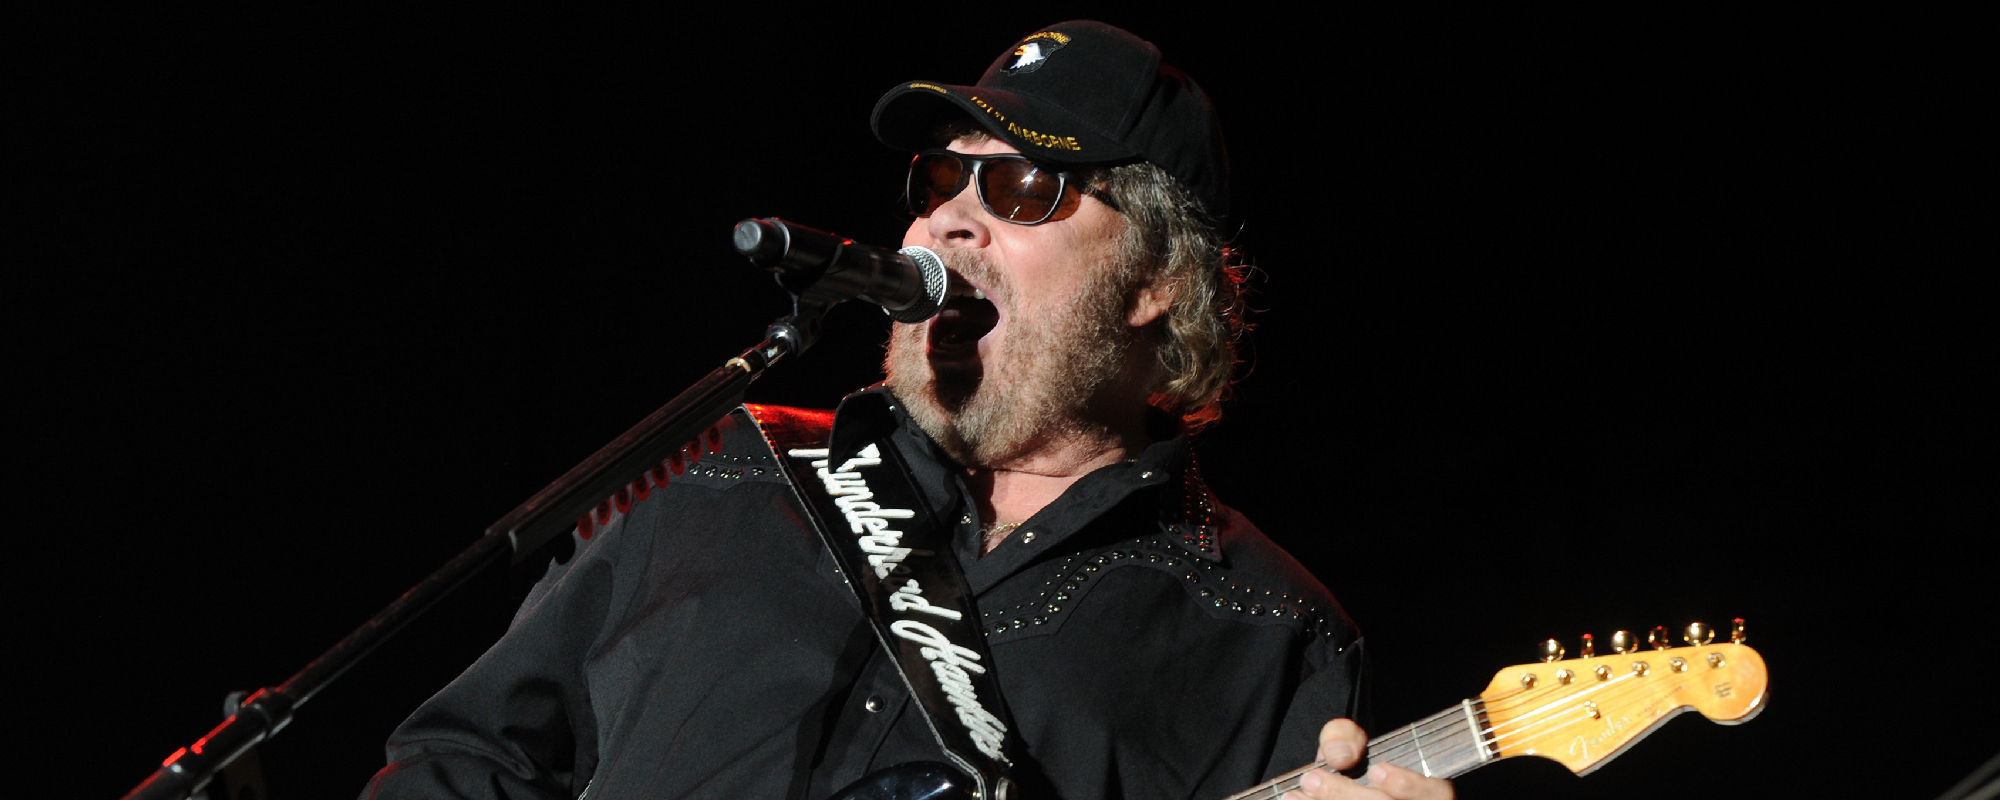 Fans Ready to “Riot” After Spotify Removes Classic Hank Williams Jr. Album From Platform